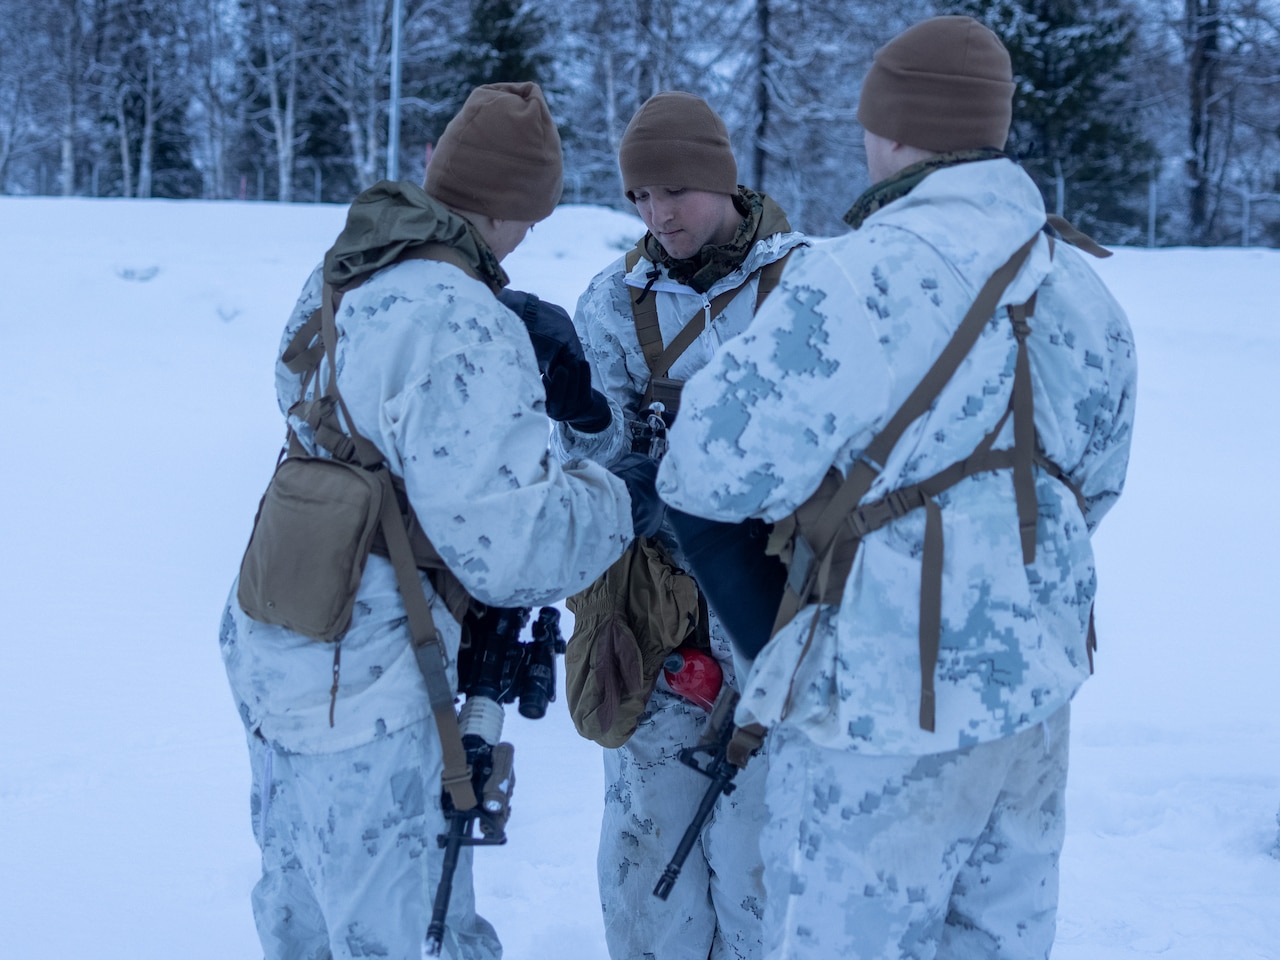 Marines work together in the snow.